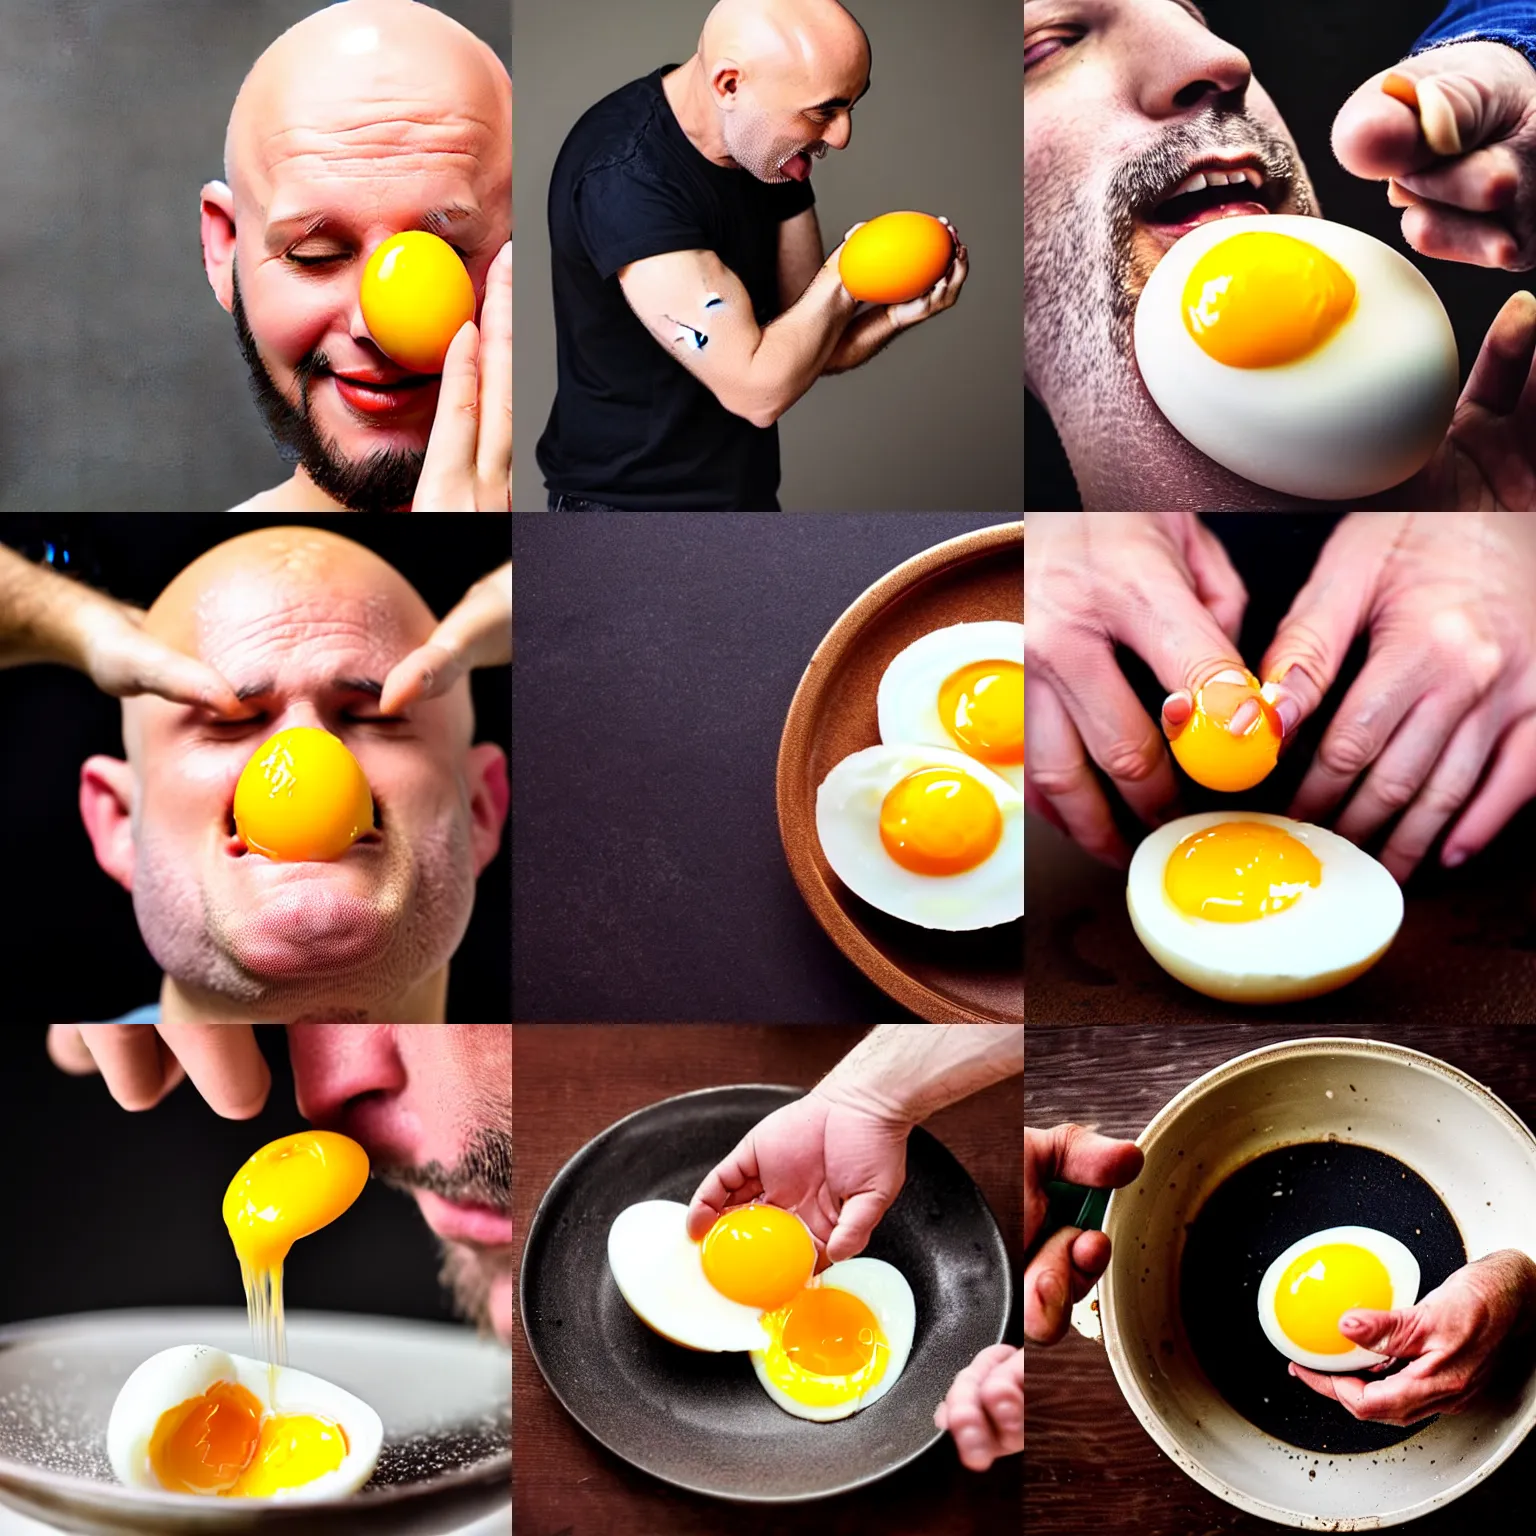 Prompt: beautiful photograph of a bald man breaking open a head to find glistening yolk within